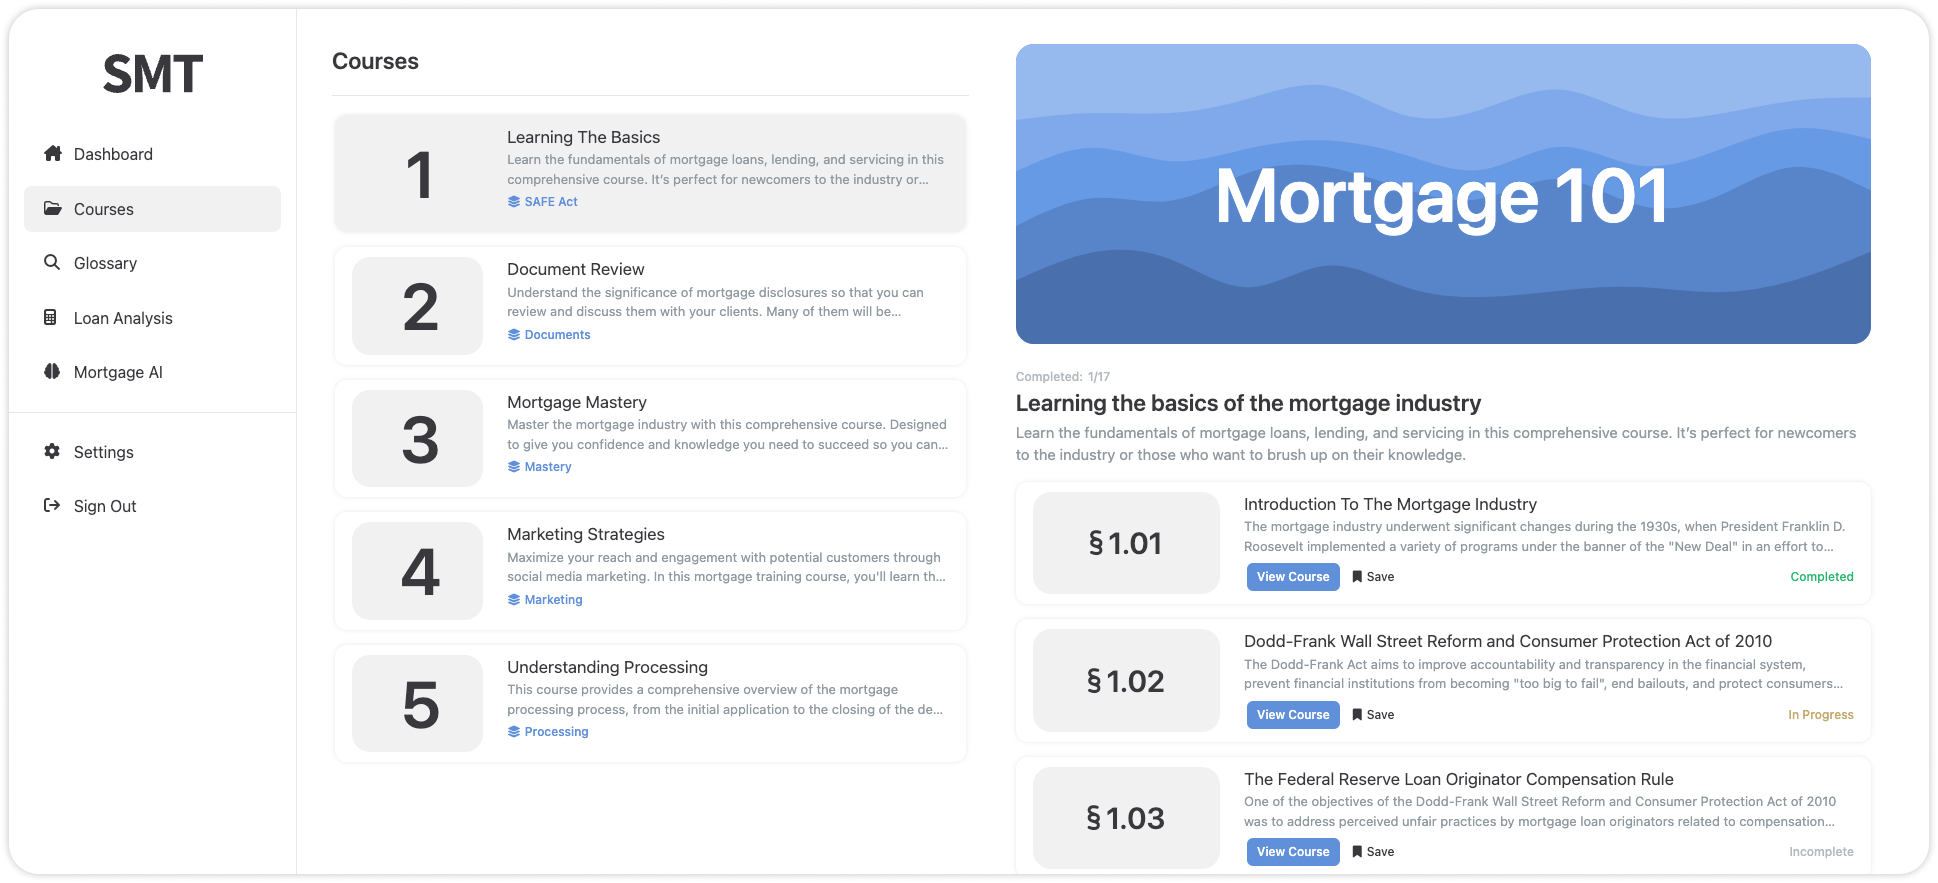 Overview of Mortgage 101 courses | Smart Mortgage Training